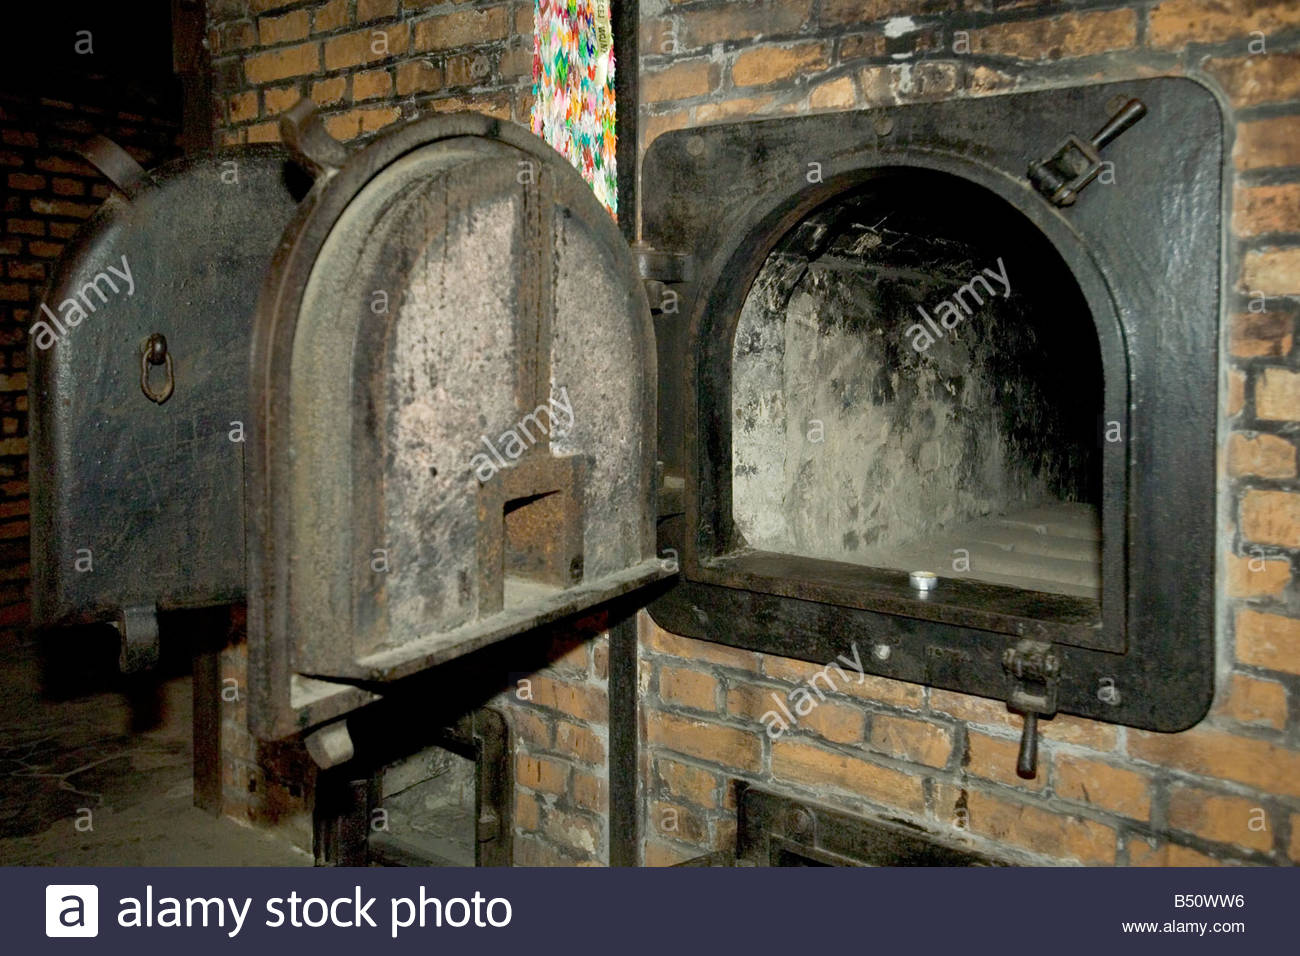 a-sobering-reminder-the-cremetorium-at-auschwitz-1-concentration-camp-B50WW6.jpg